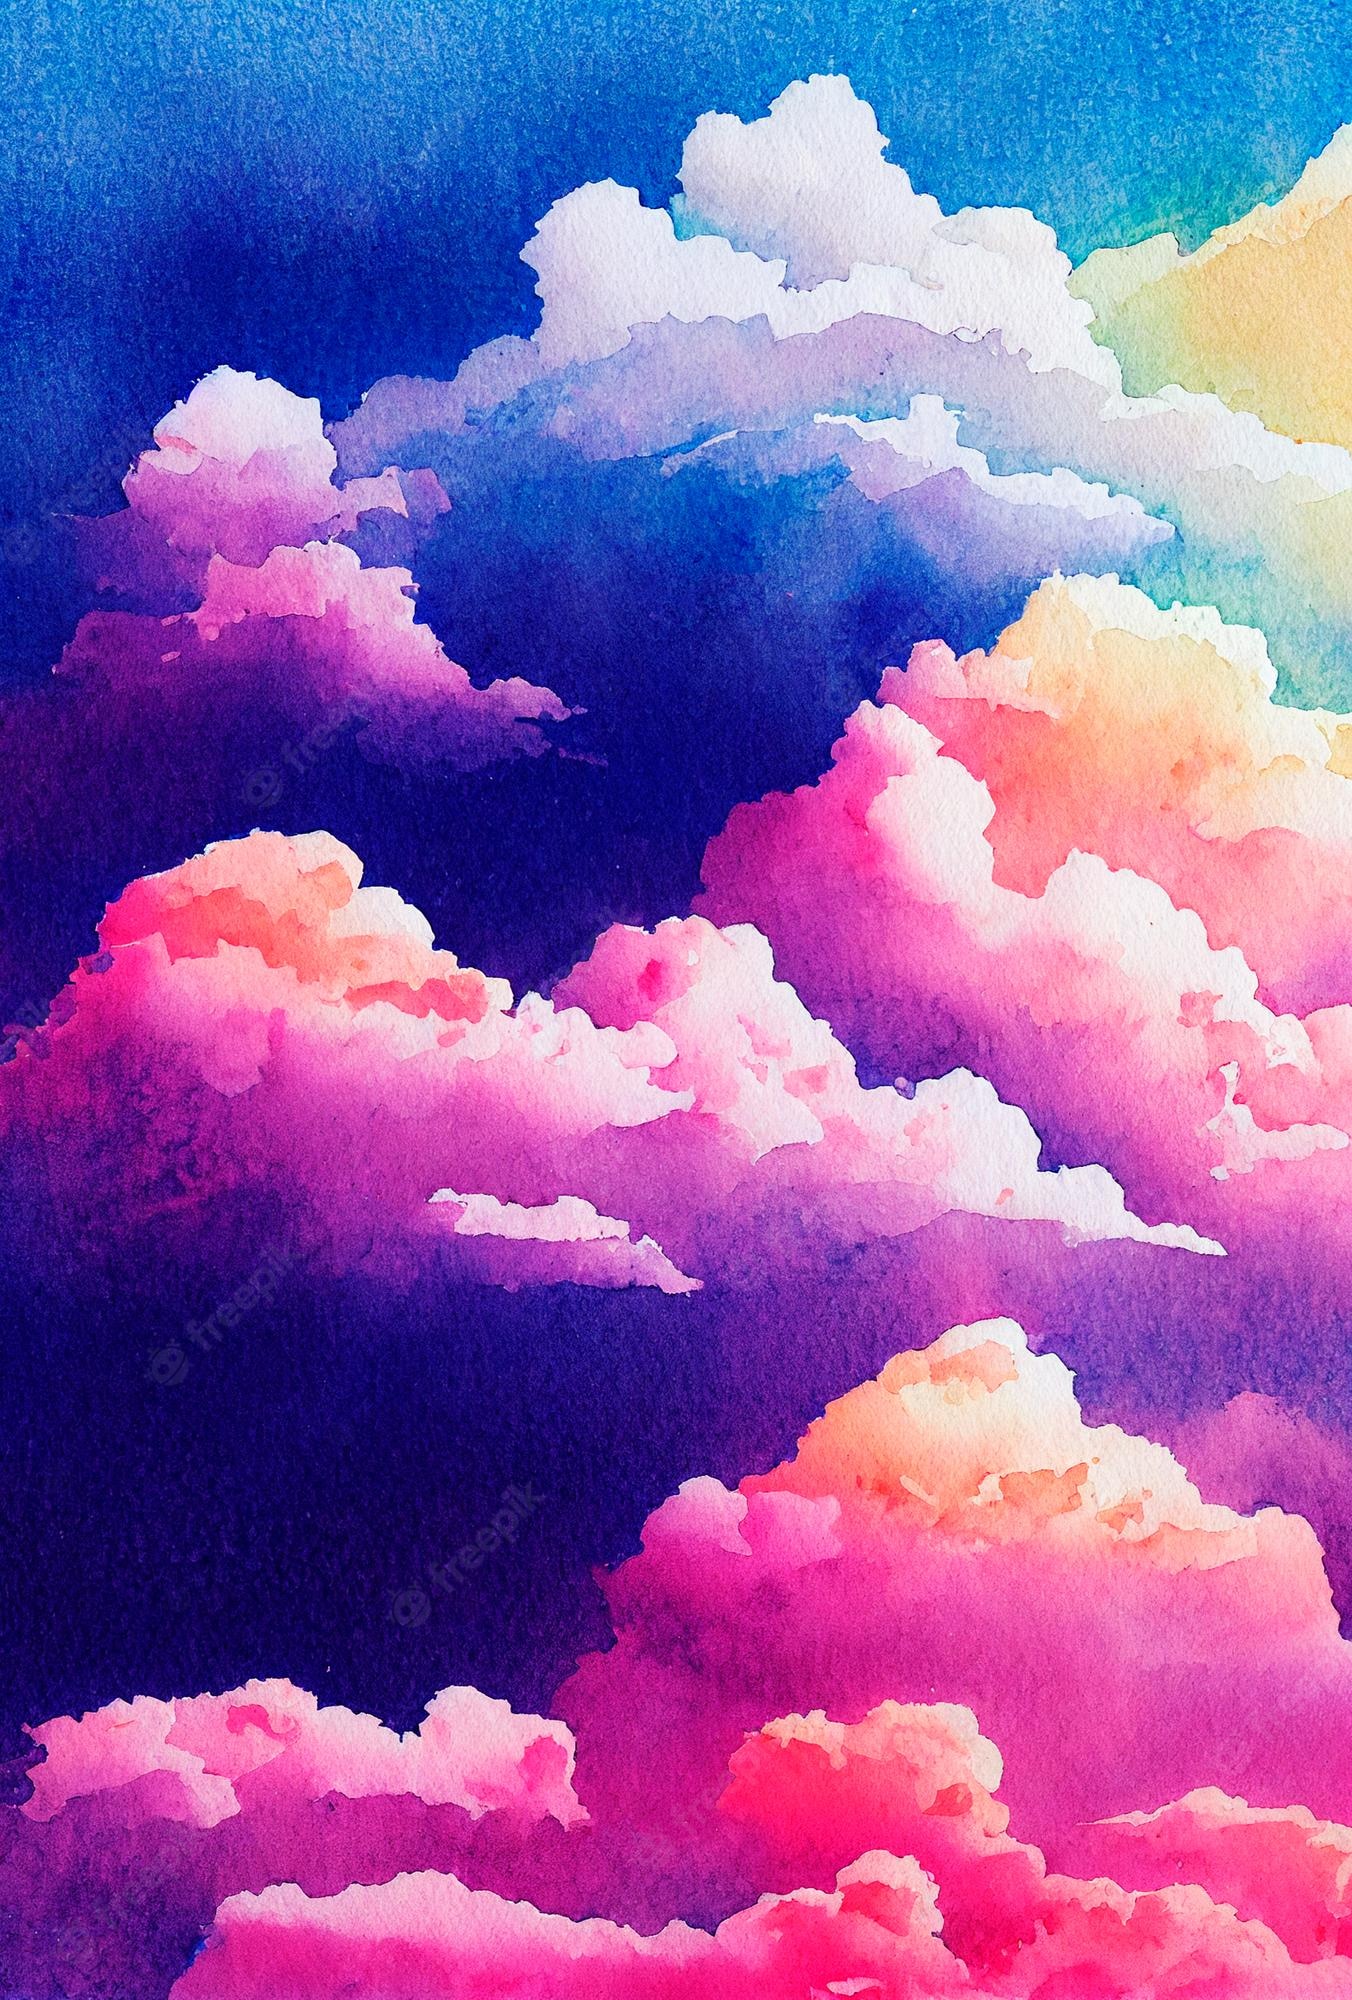 Cloud Painting Image